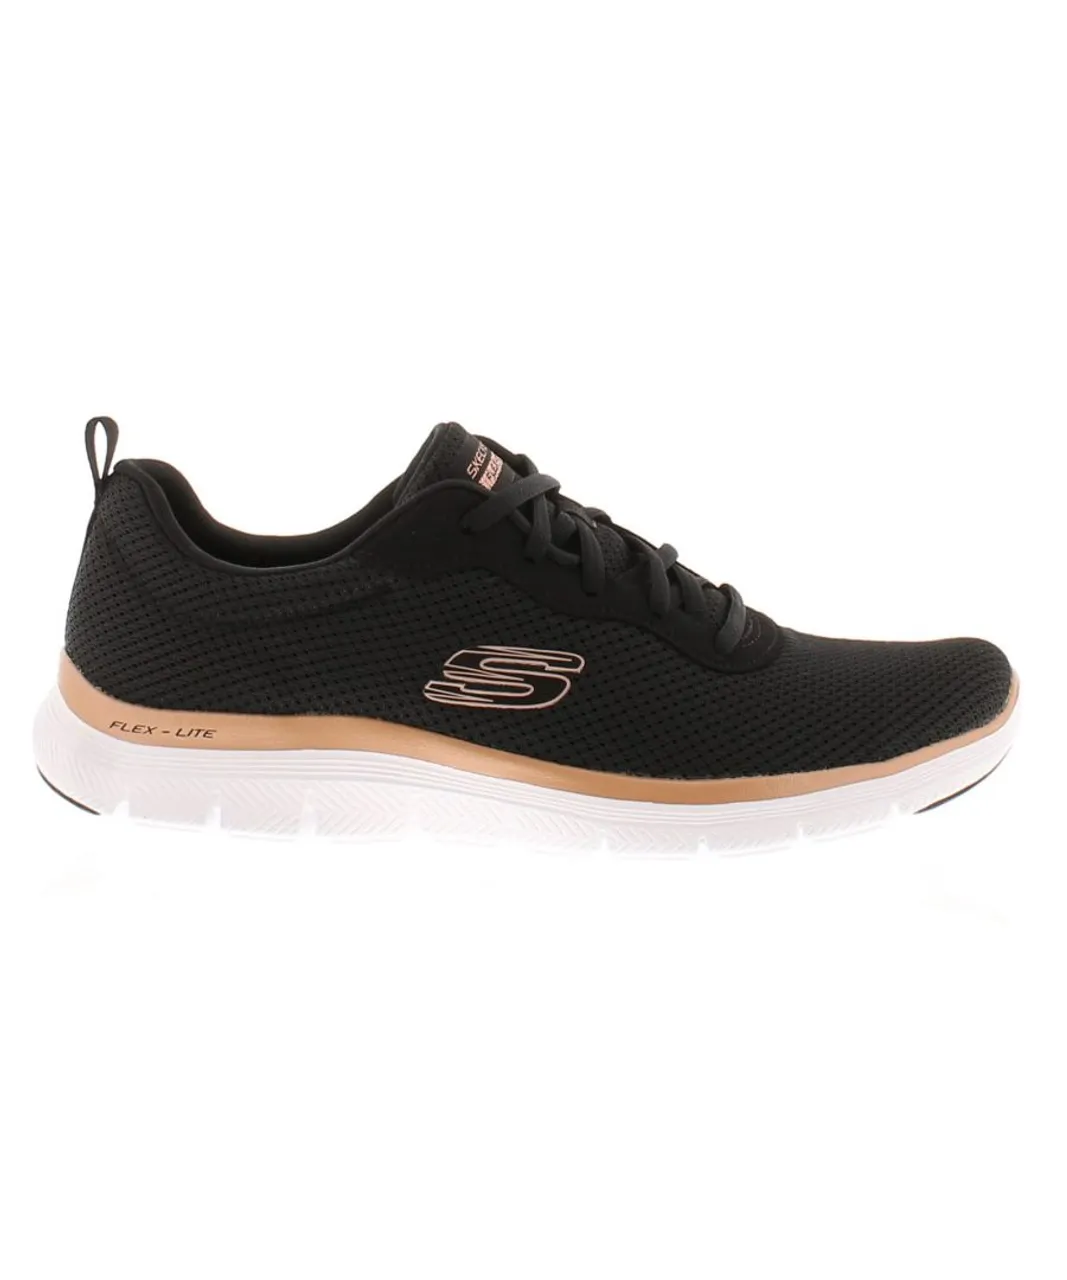 Skechers Womens Trainers Flex Appeal 4 0 Lace Up black rose gold